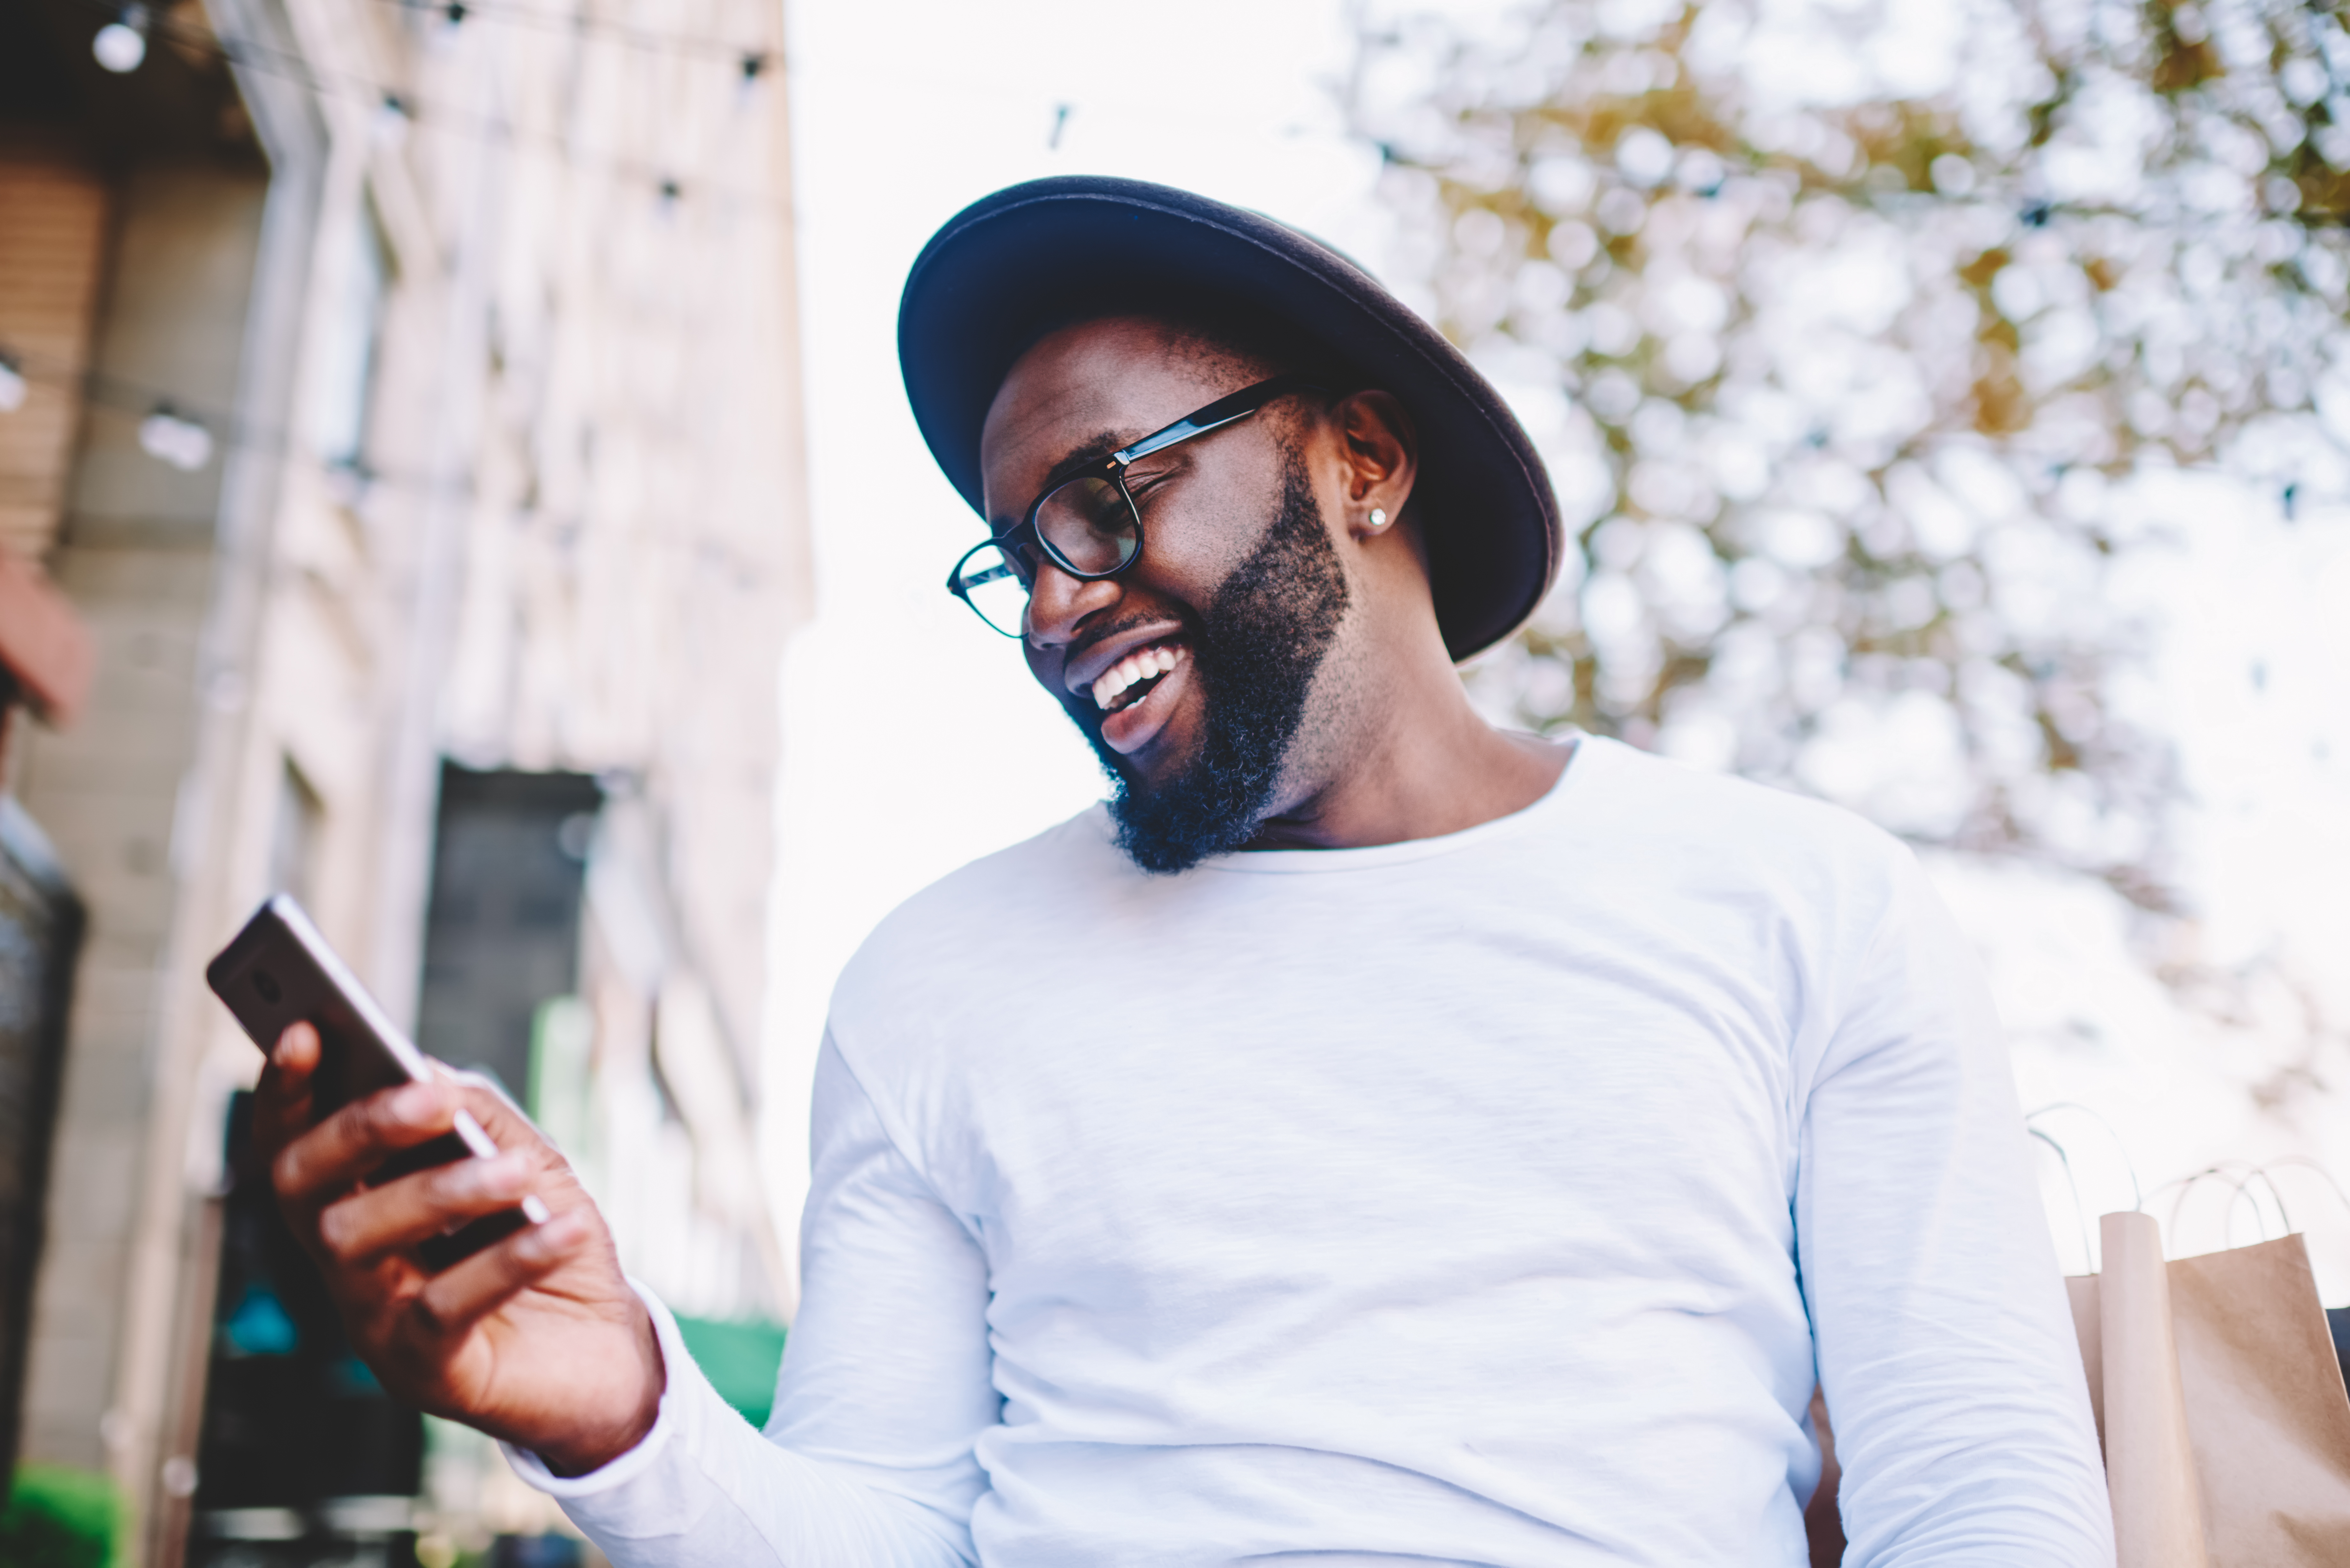 Stock photo of an African-American person with a beard looking at a mobile phone while walking own the street. 